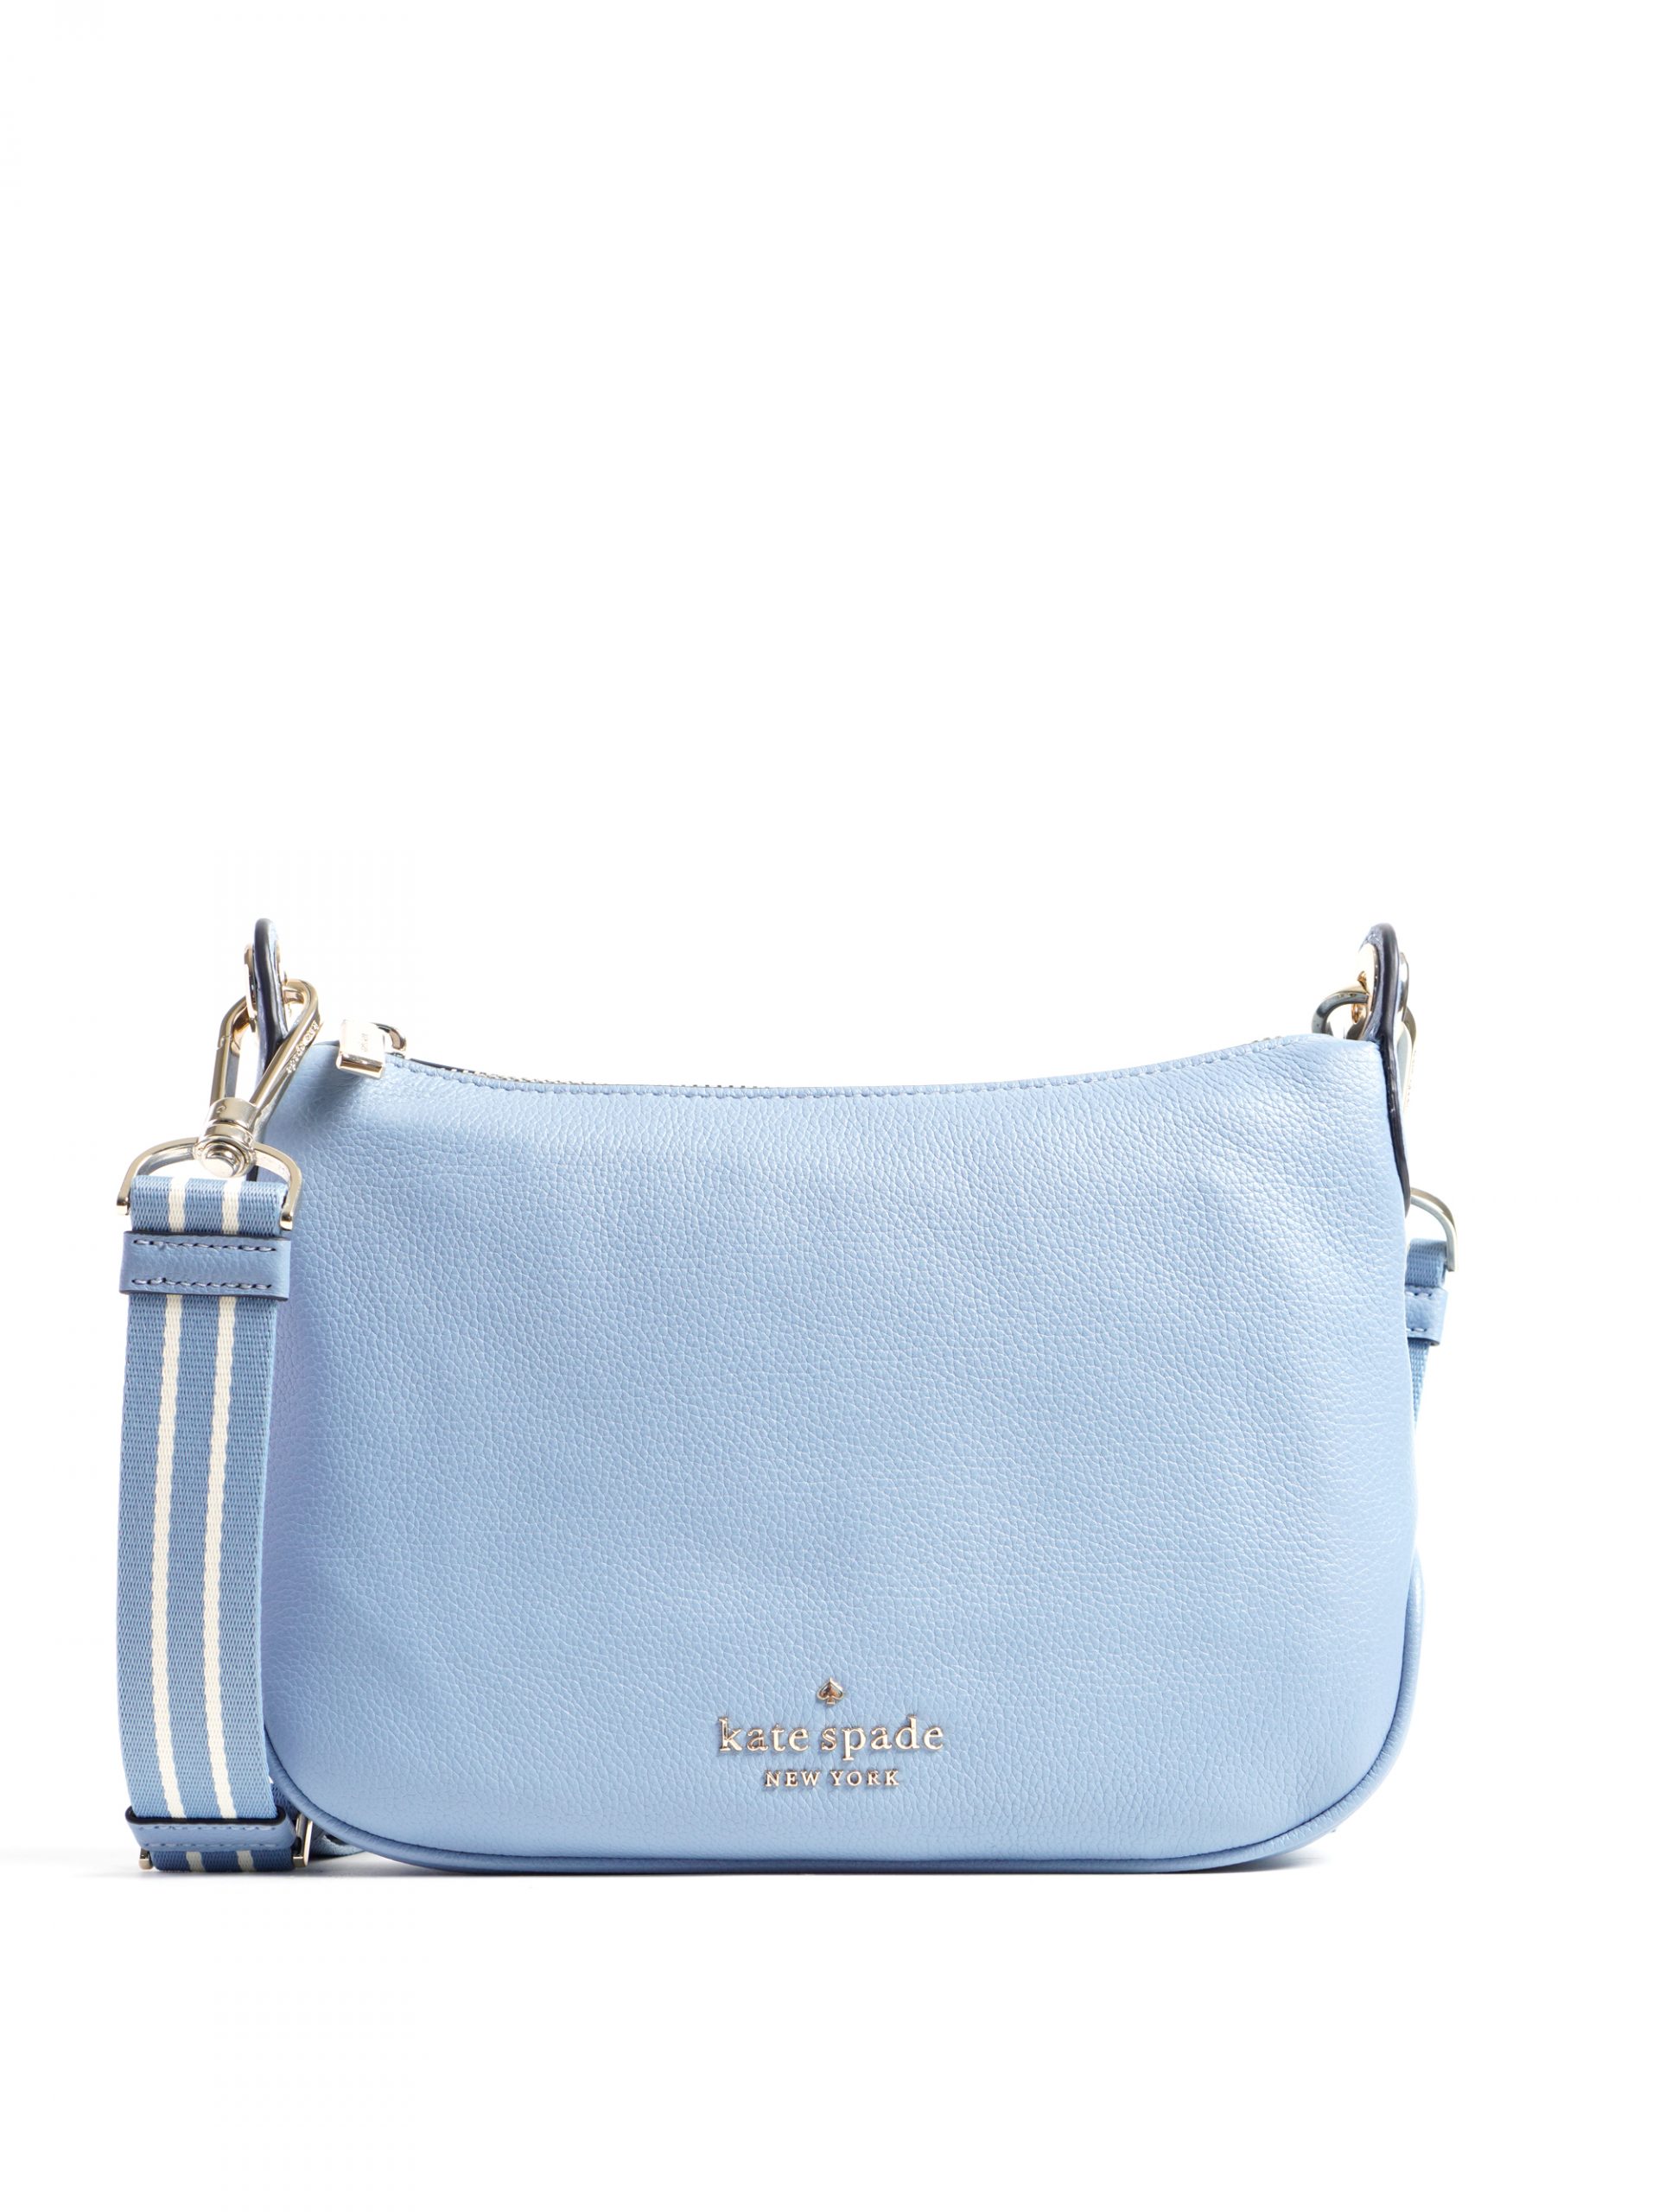 kate spade, Bags, New Kate Spade Rosie Small Leather Crossbody In Dusty  Blue